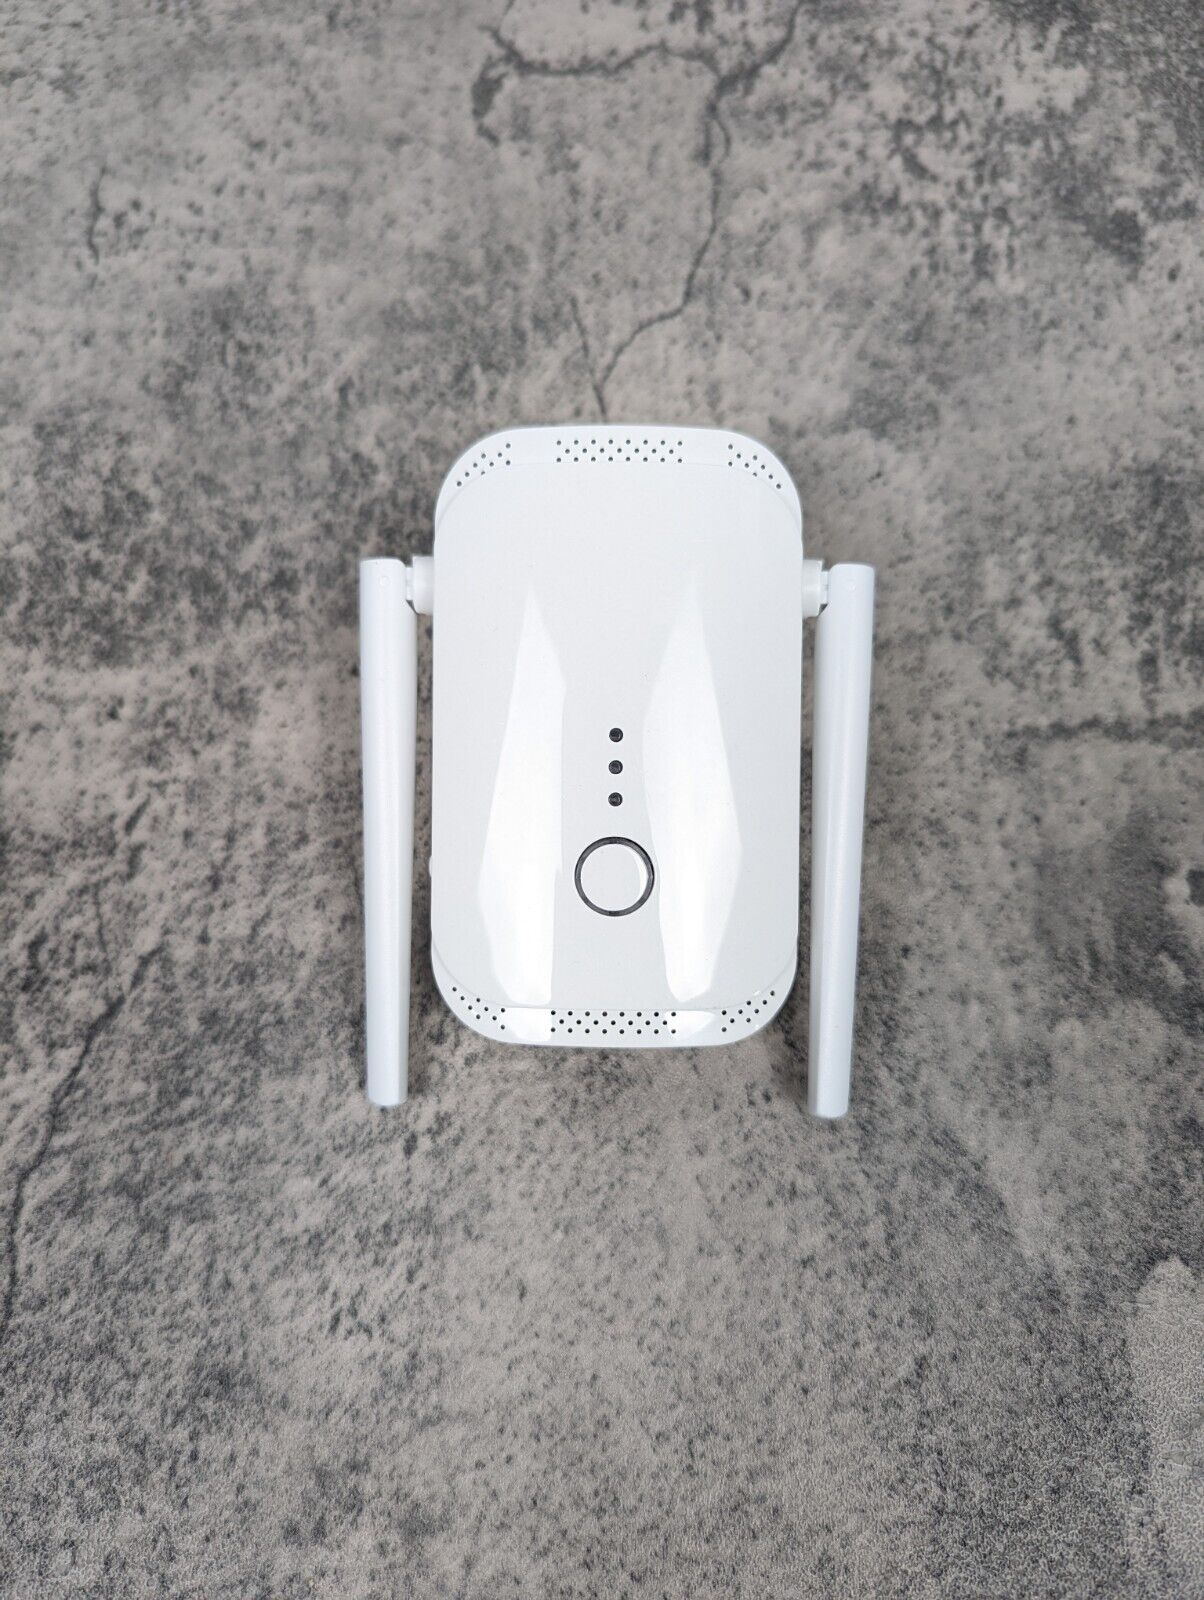 Macard N300 White 300 Mbps Wireless Repeater & WiFi Range Extender TESTED